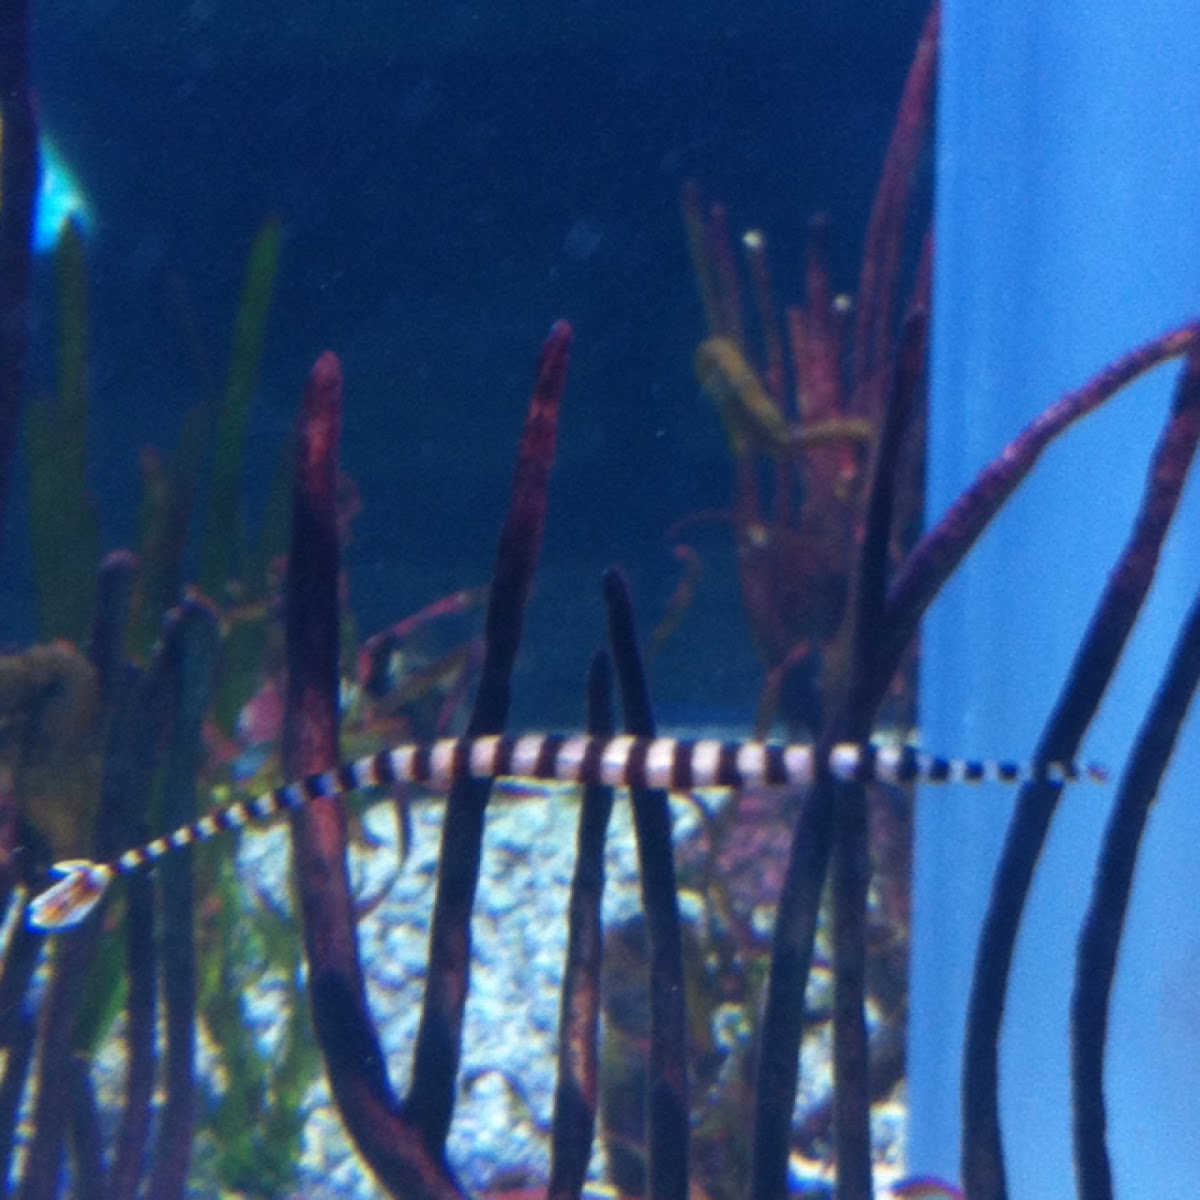 Banded pipefish